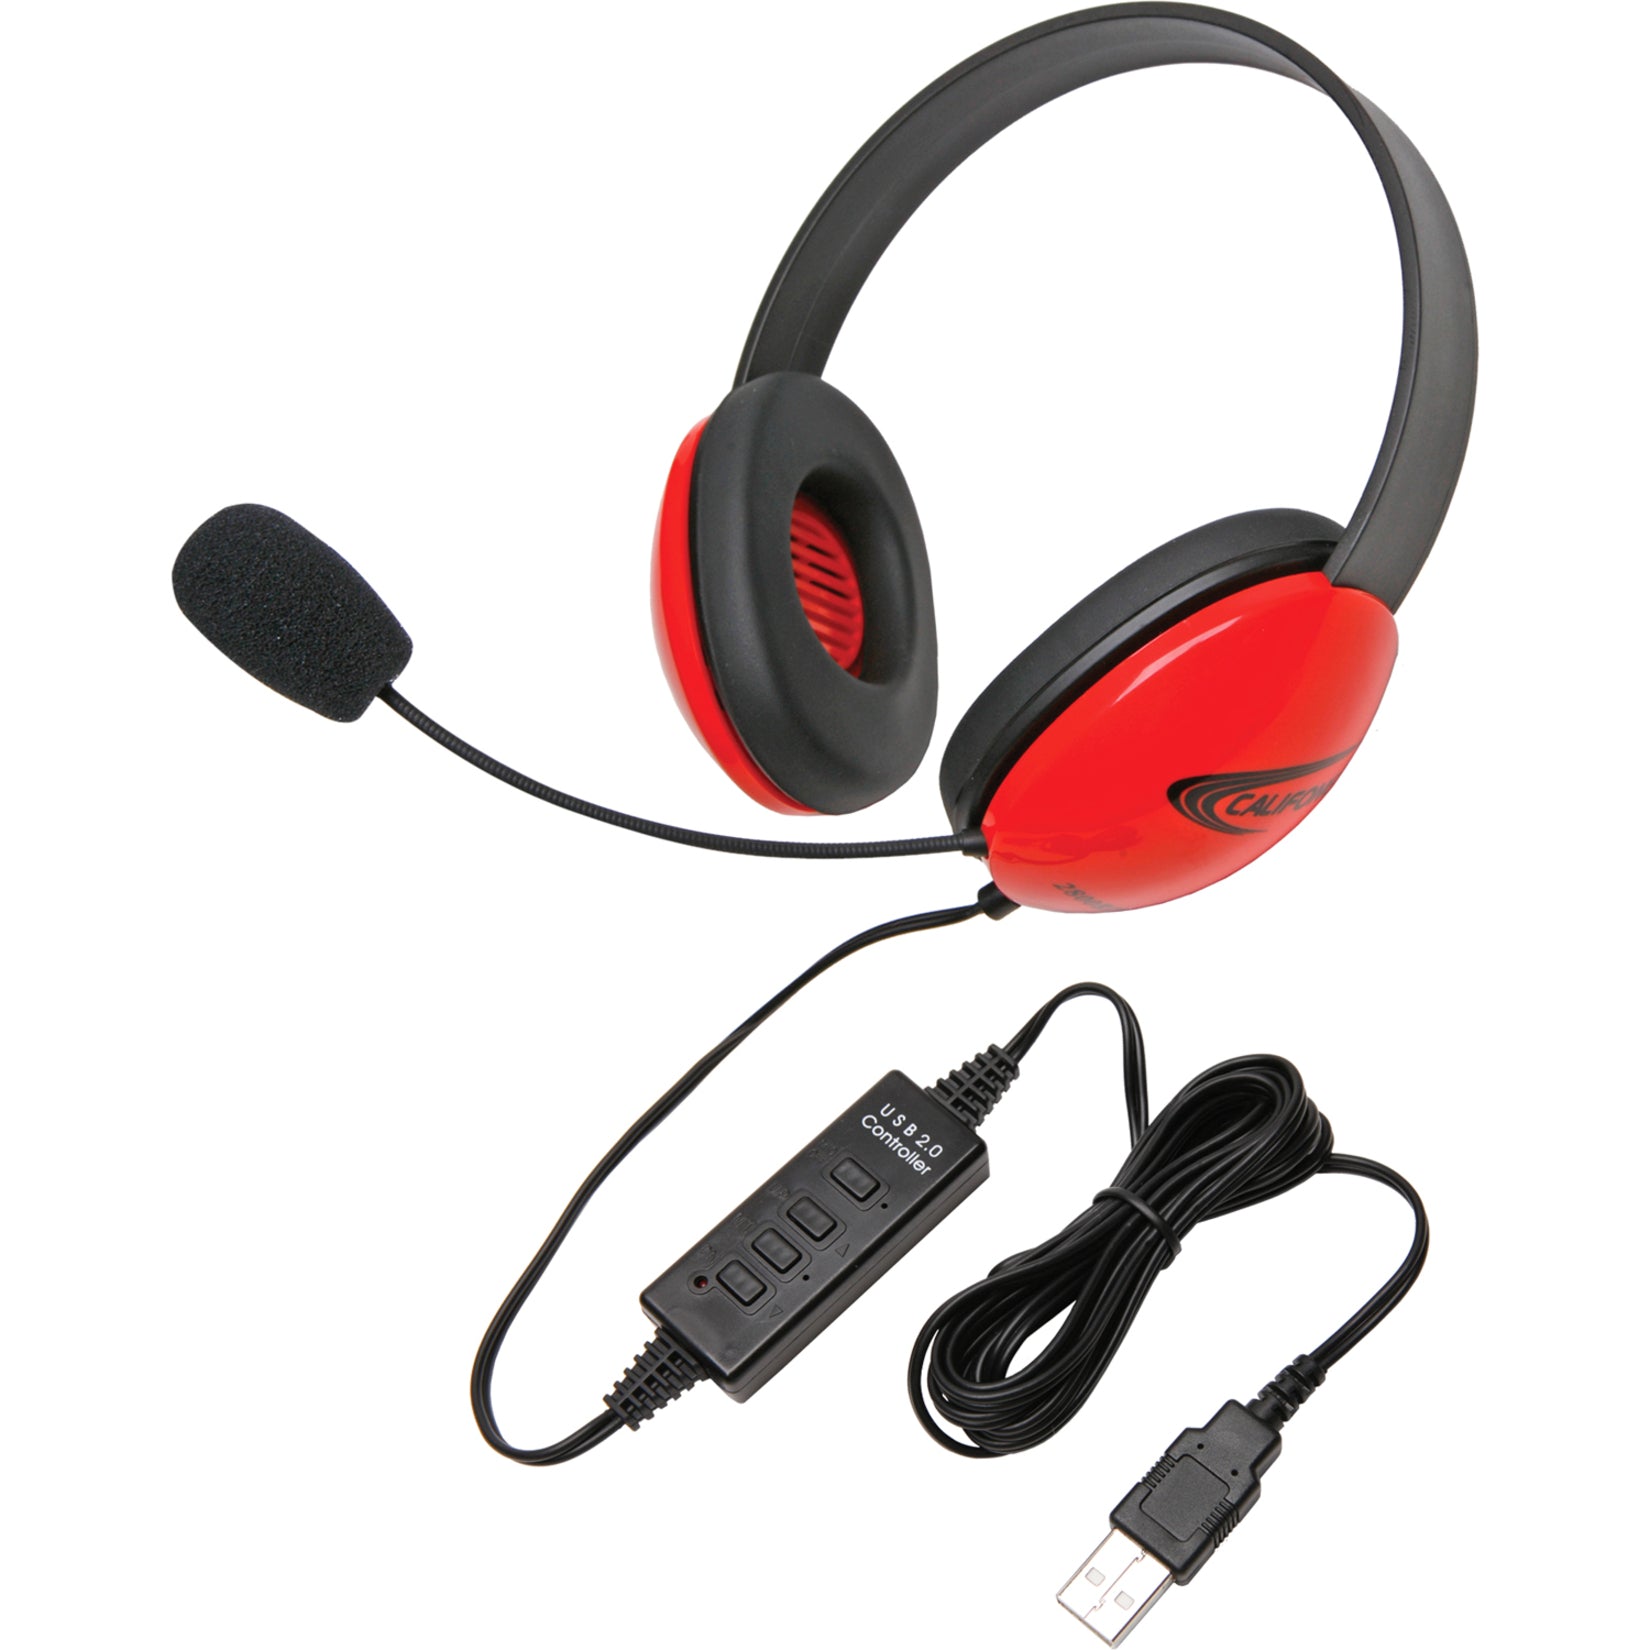 Califone 2800RD-USB USB Stereo Headphones Listening First Series Red, Noise Reduction, Flexible